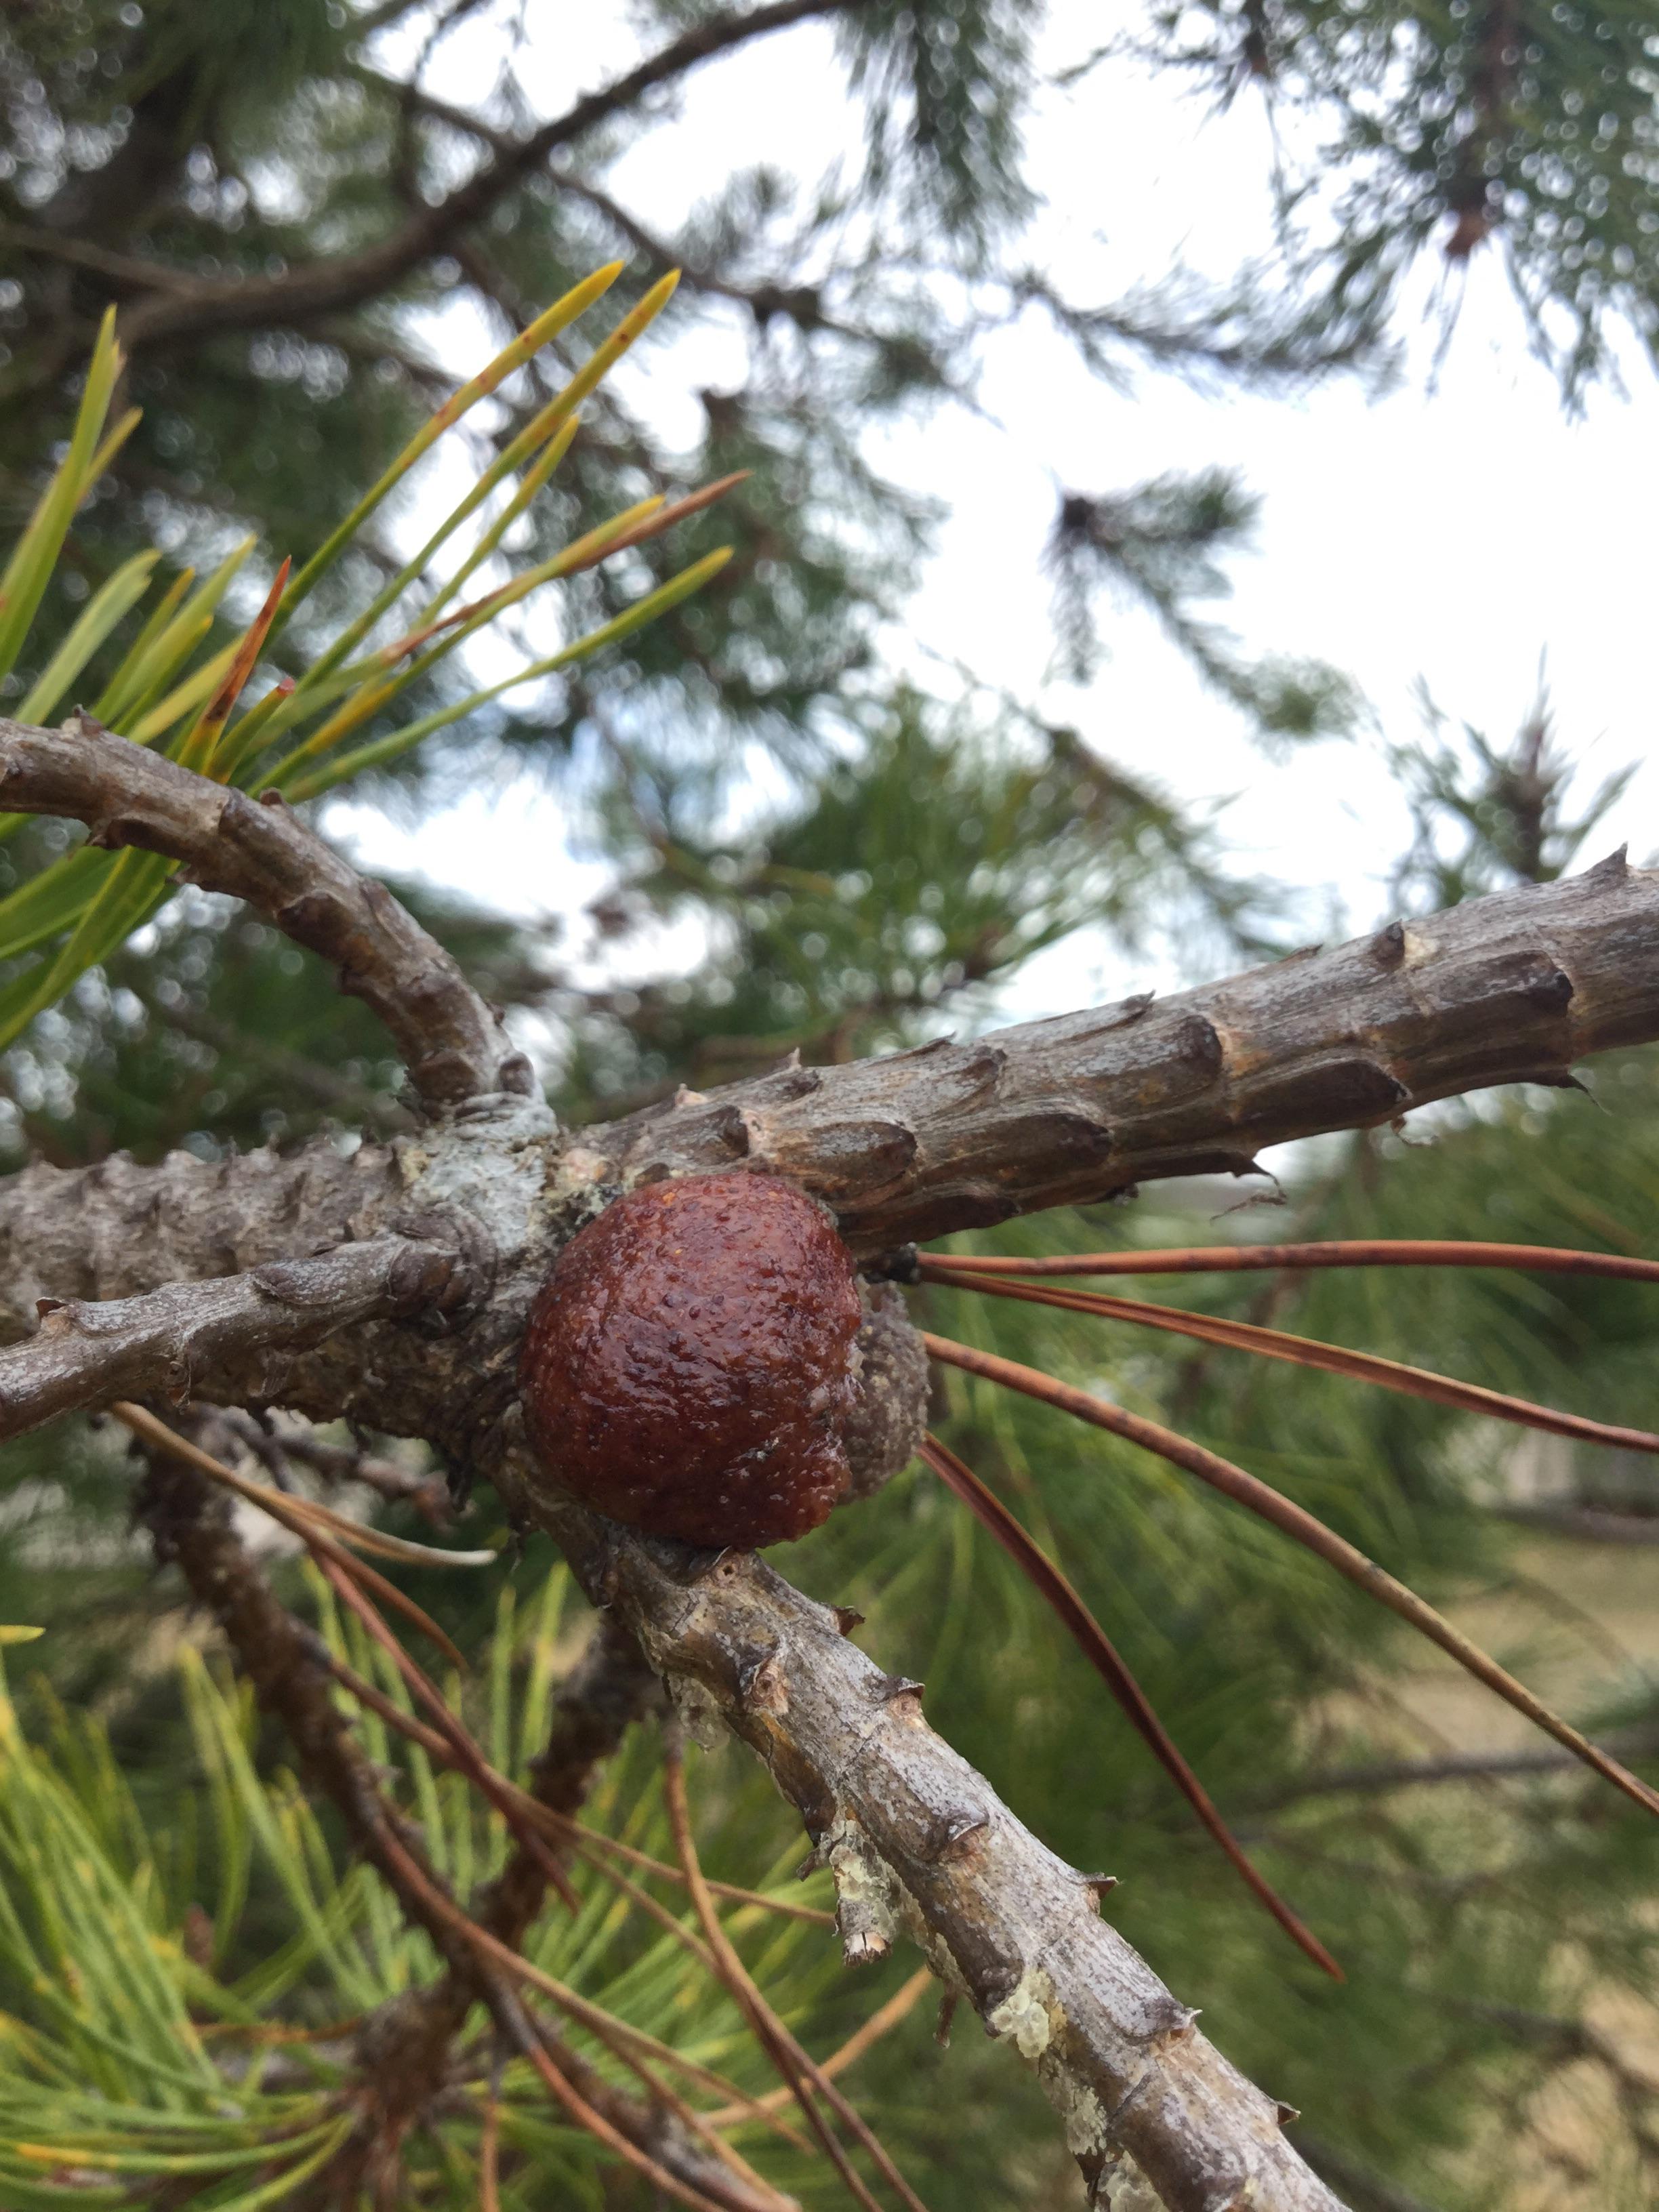 Worms growing in balls on pine tree branches, what should I do ...